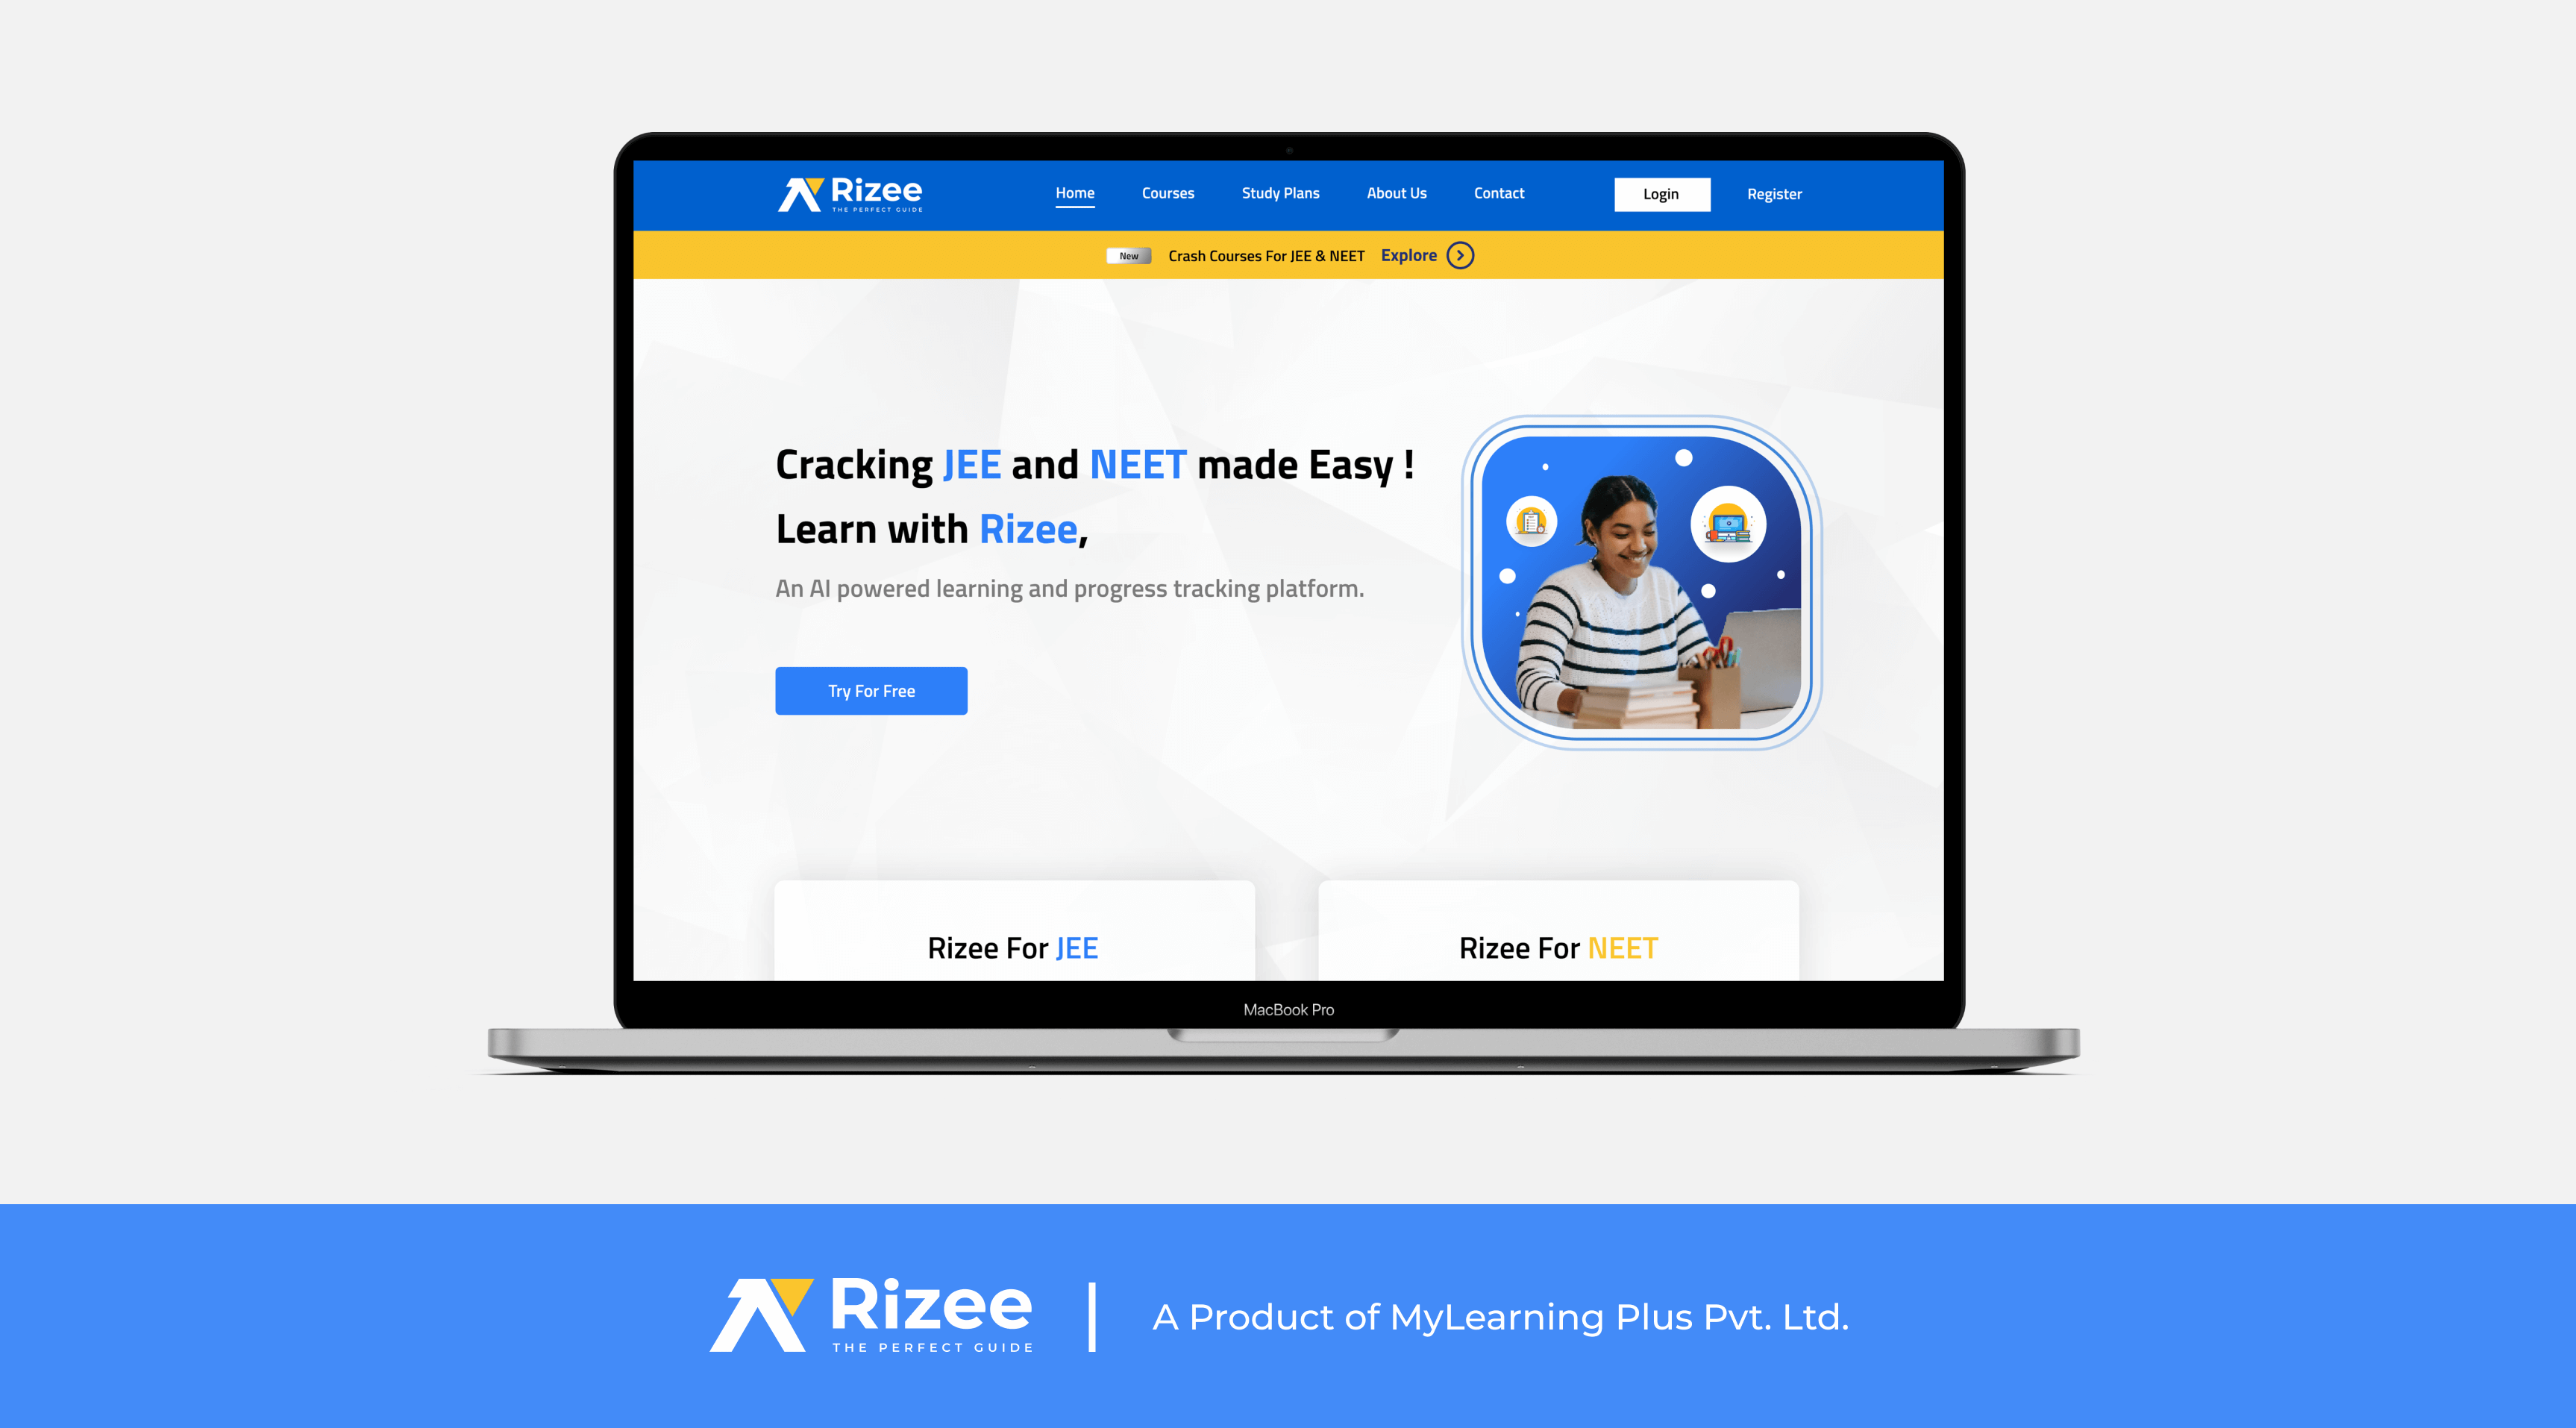 thank you for viewing the Rizee project